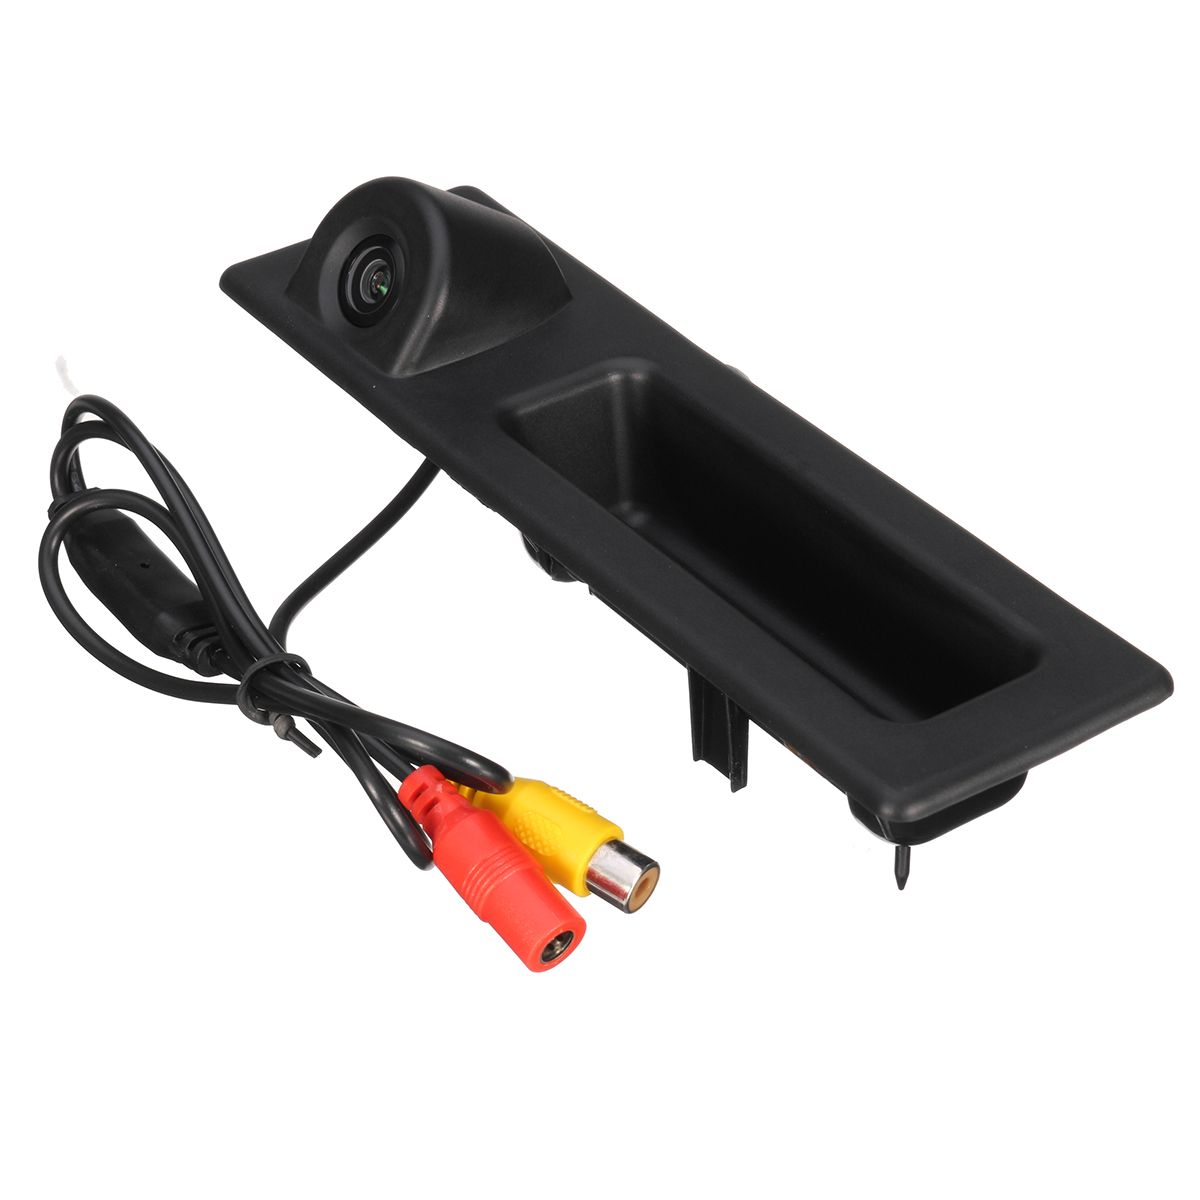 Car-Truck-Handle-CCD-Reversing-Rear-View-Camera-For-BMW-3-Series-F30-F31-F34-GT-1226421